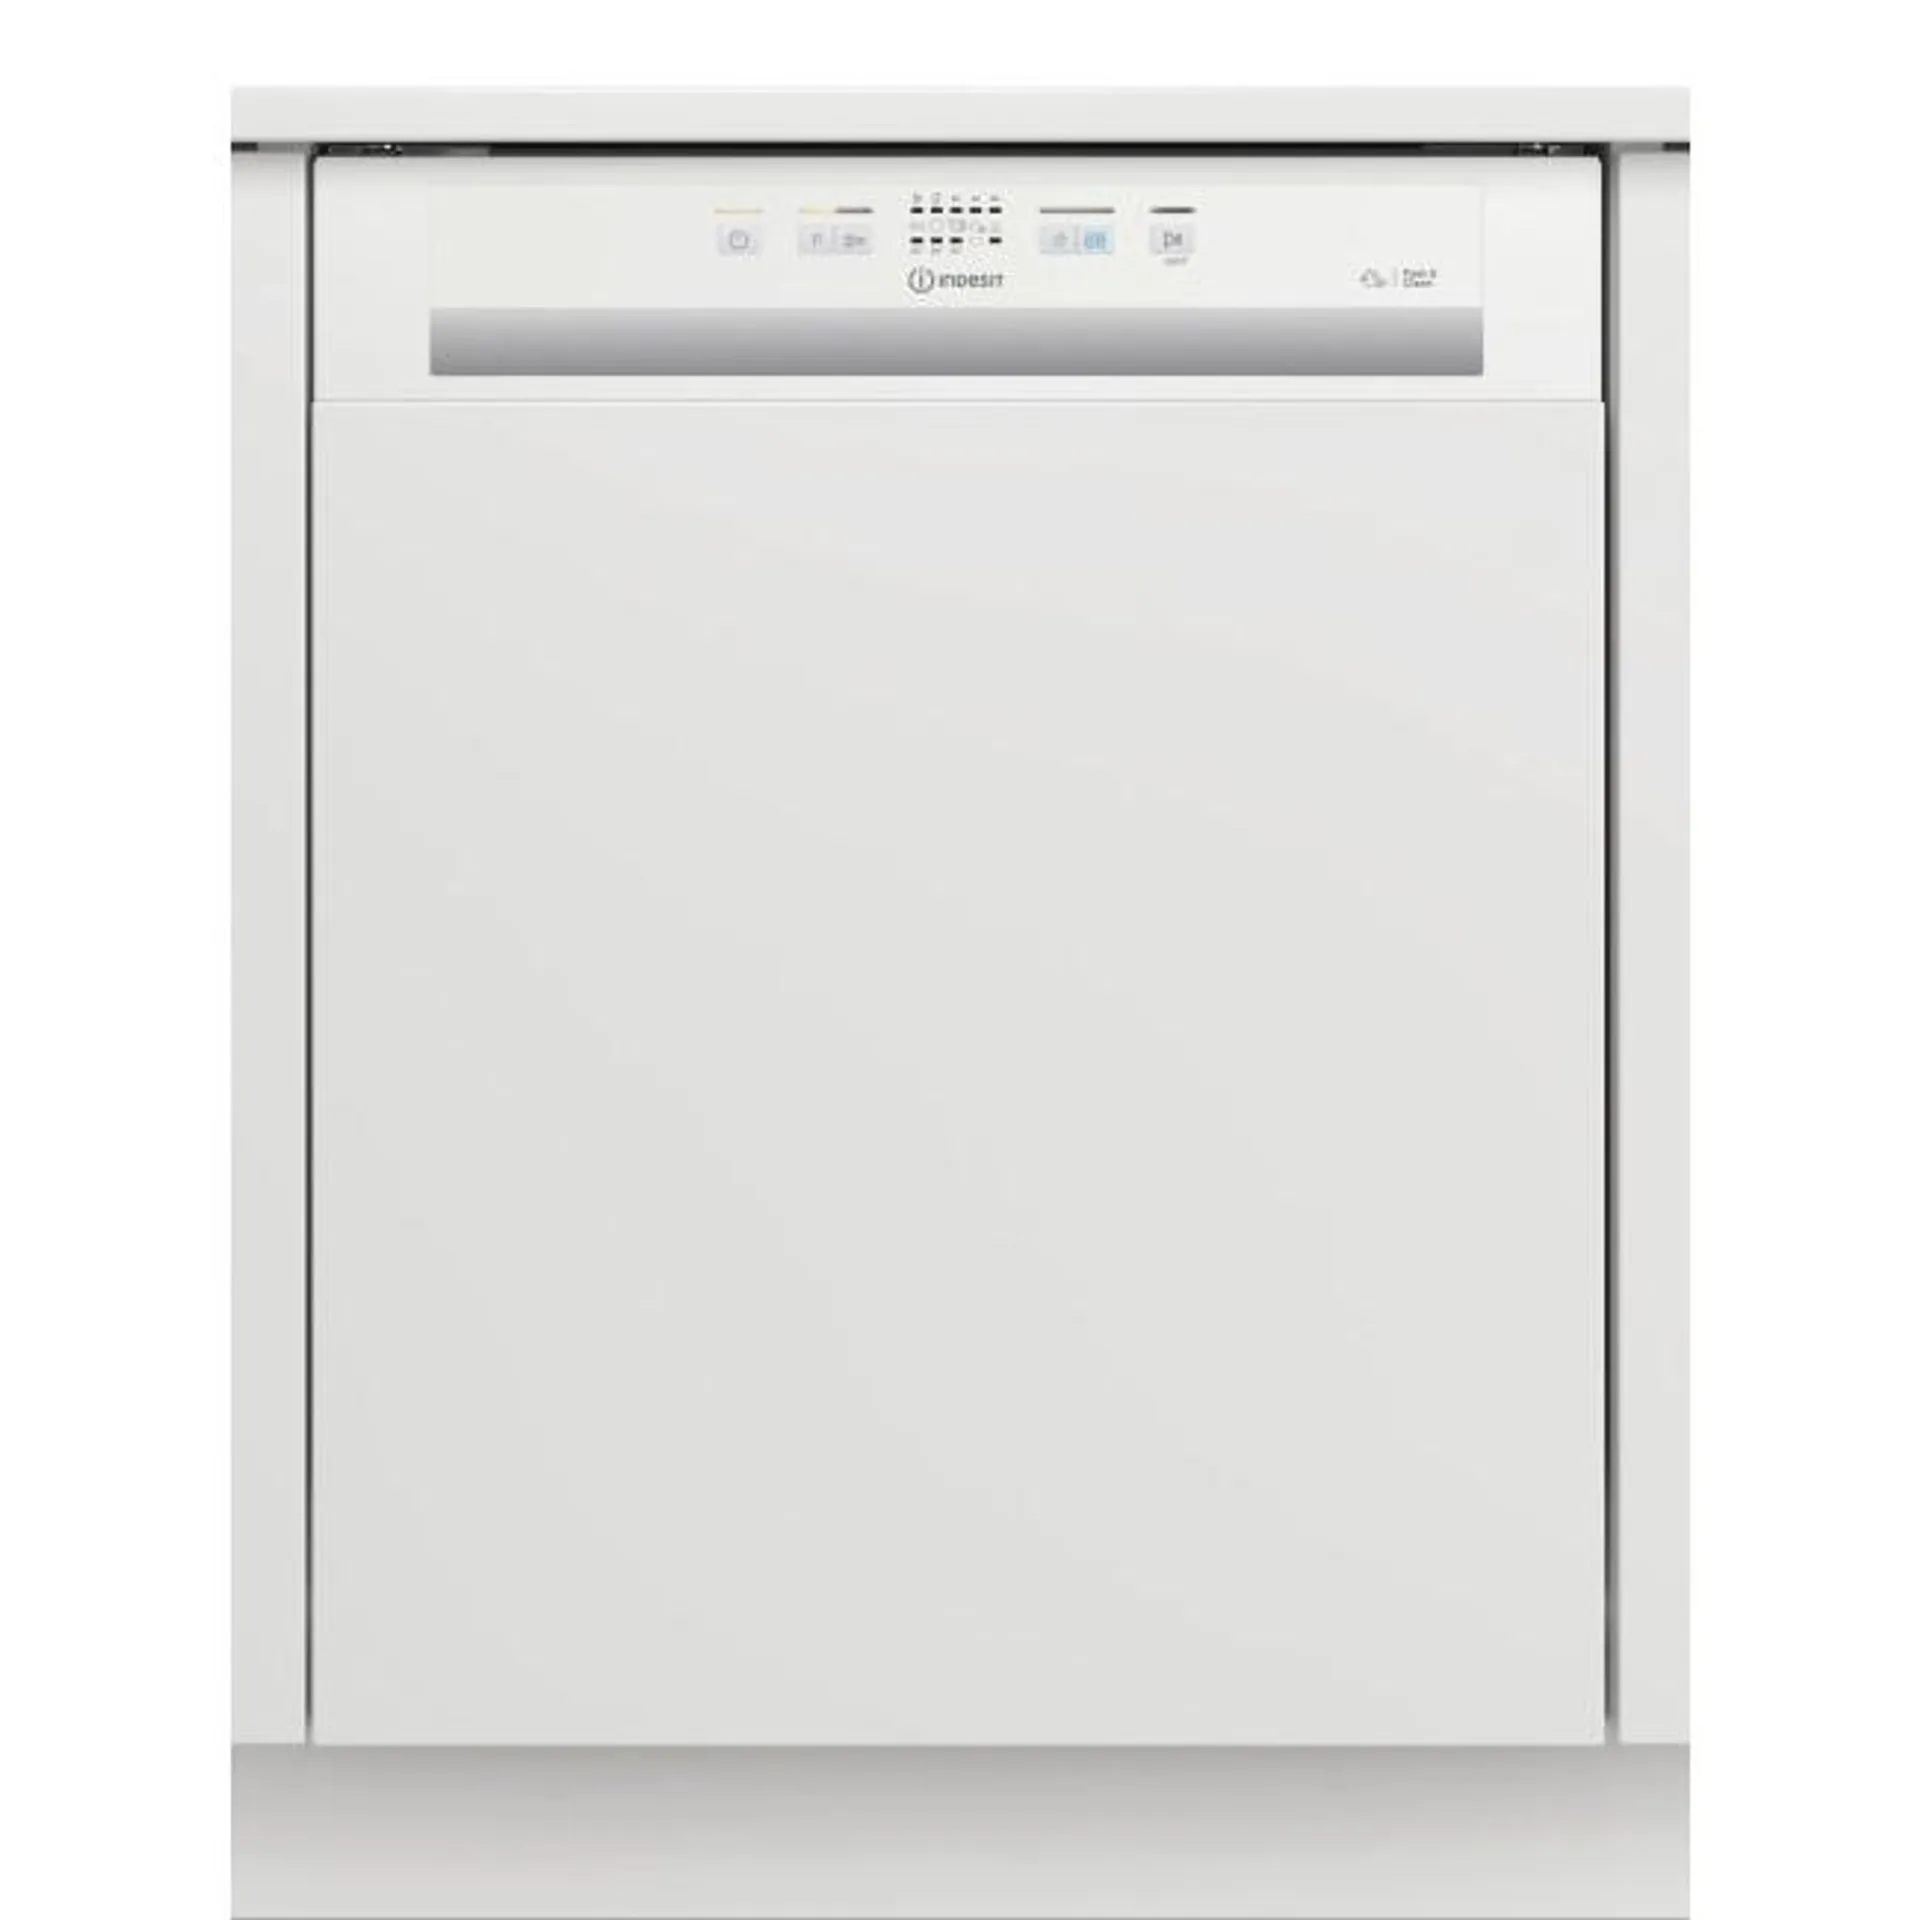 Indesit Fast&Clean 14 Place Settings Semi Integrated Dishwasher - White